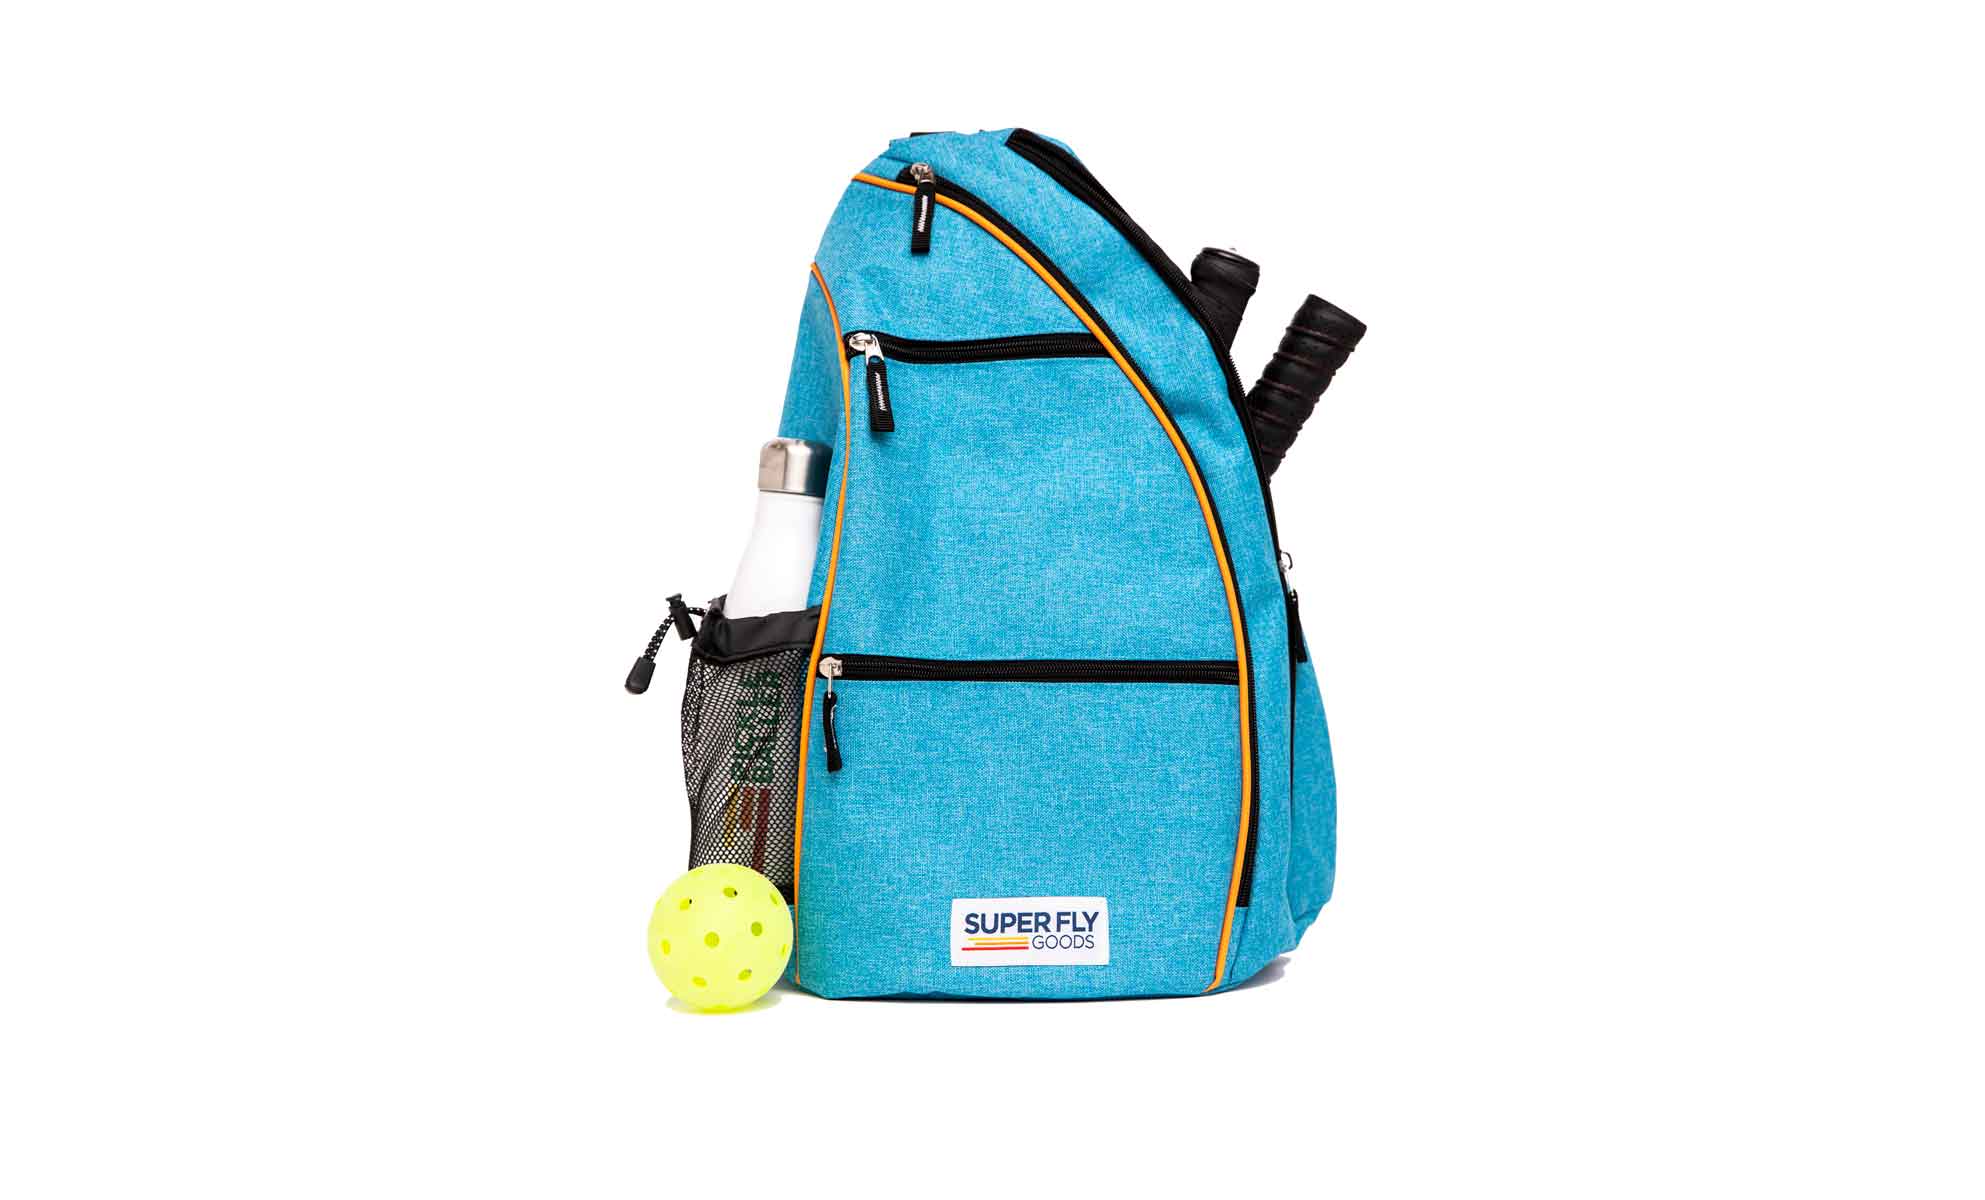 example of a backpack shot for ecommerce